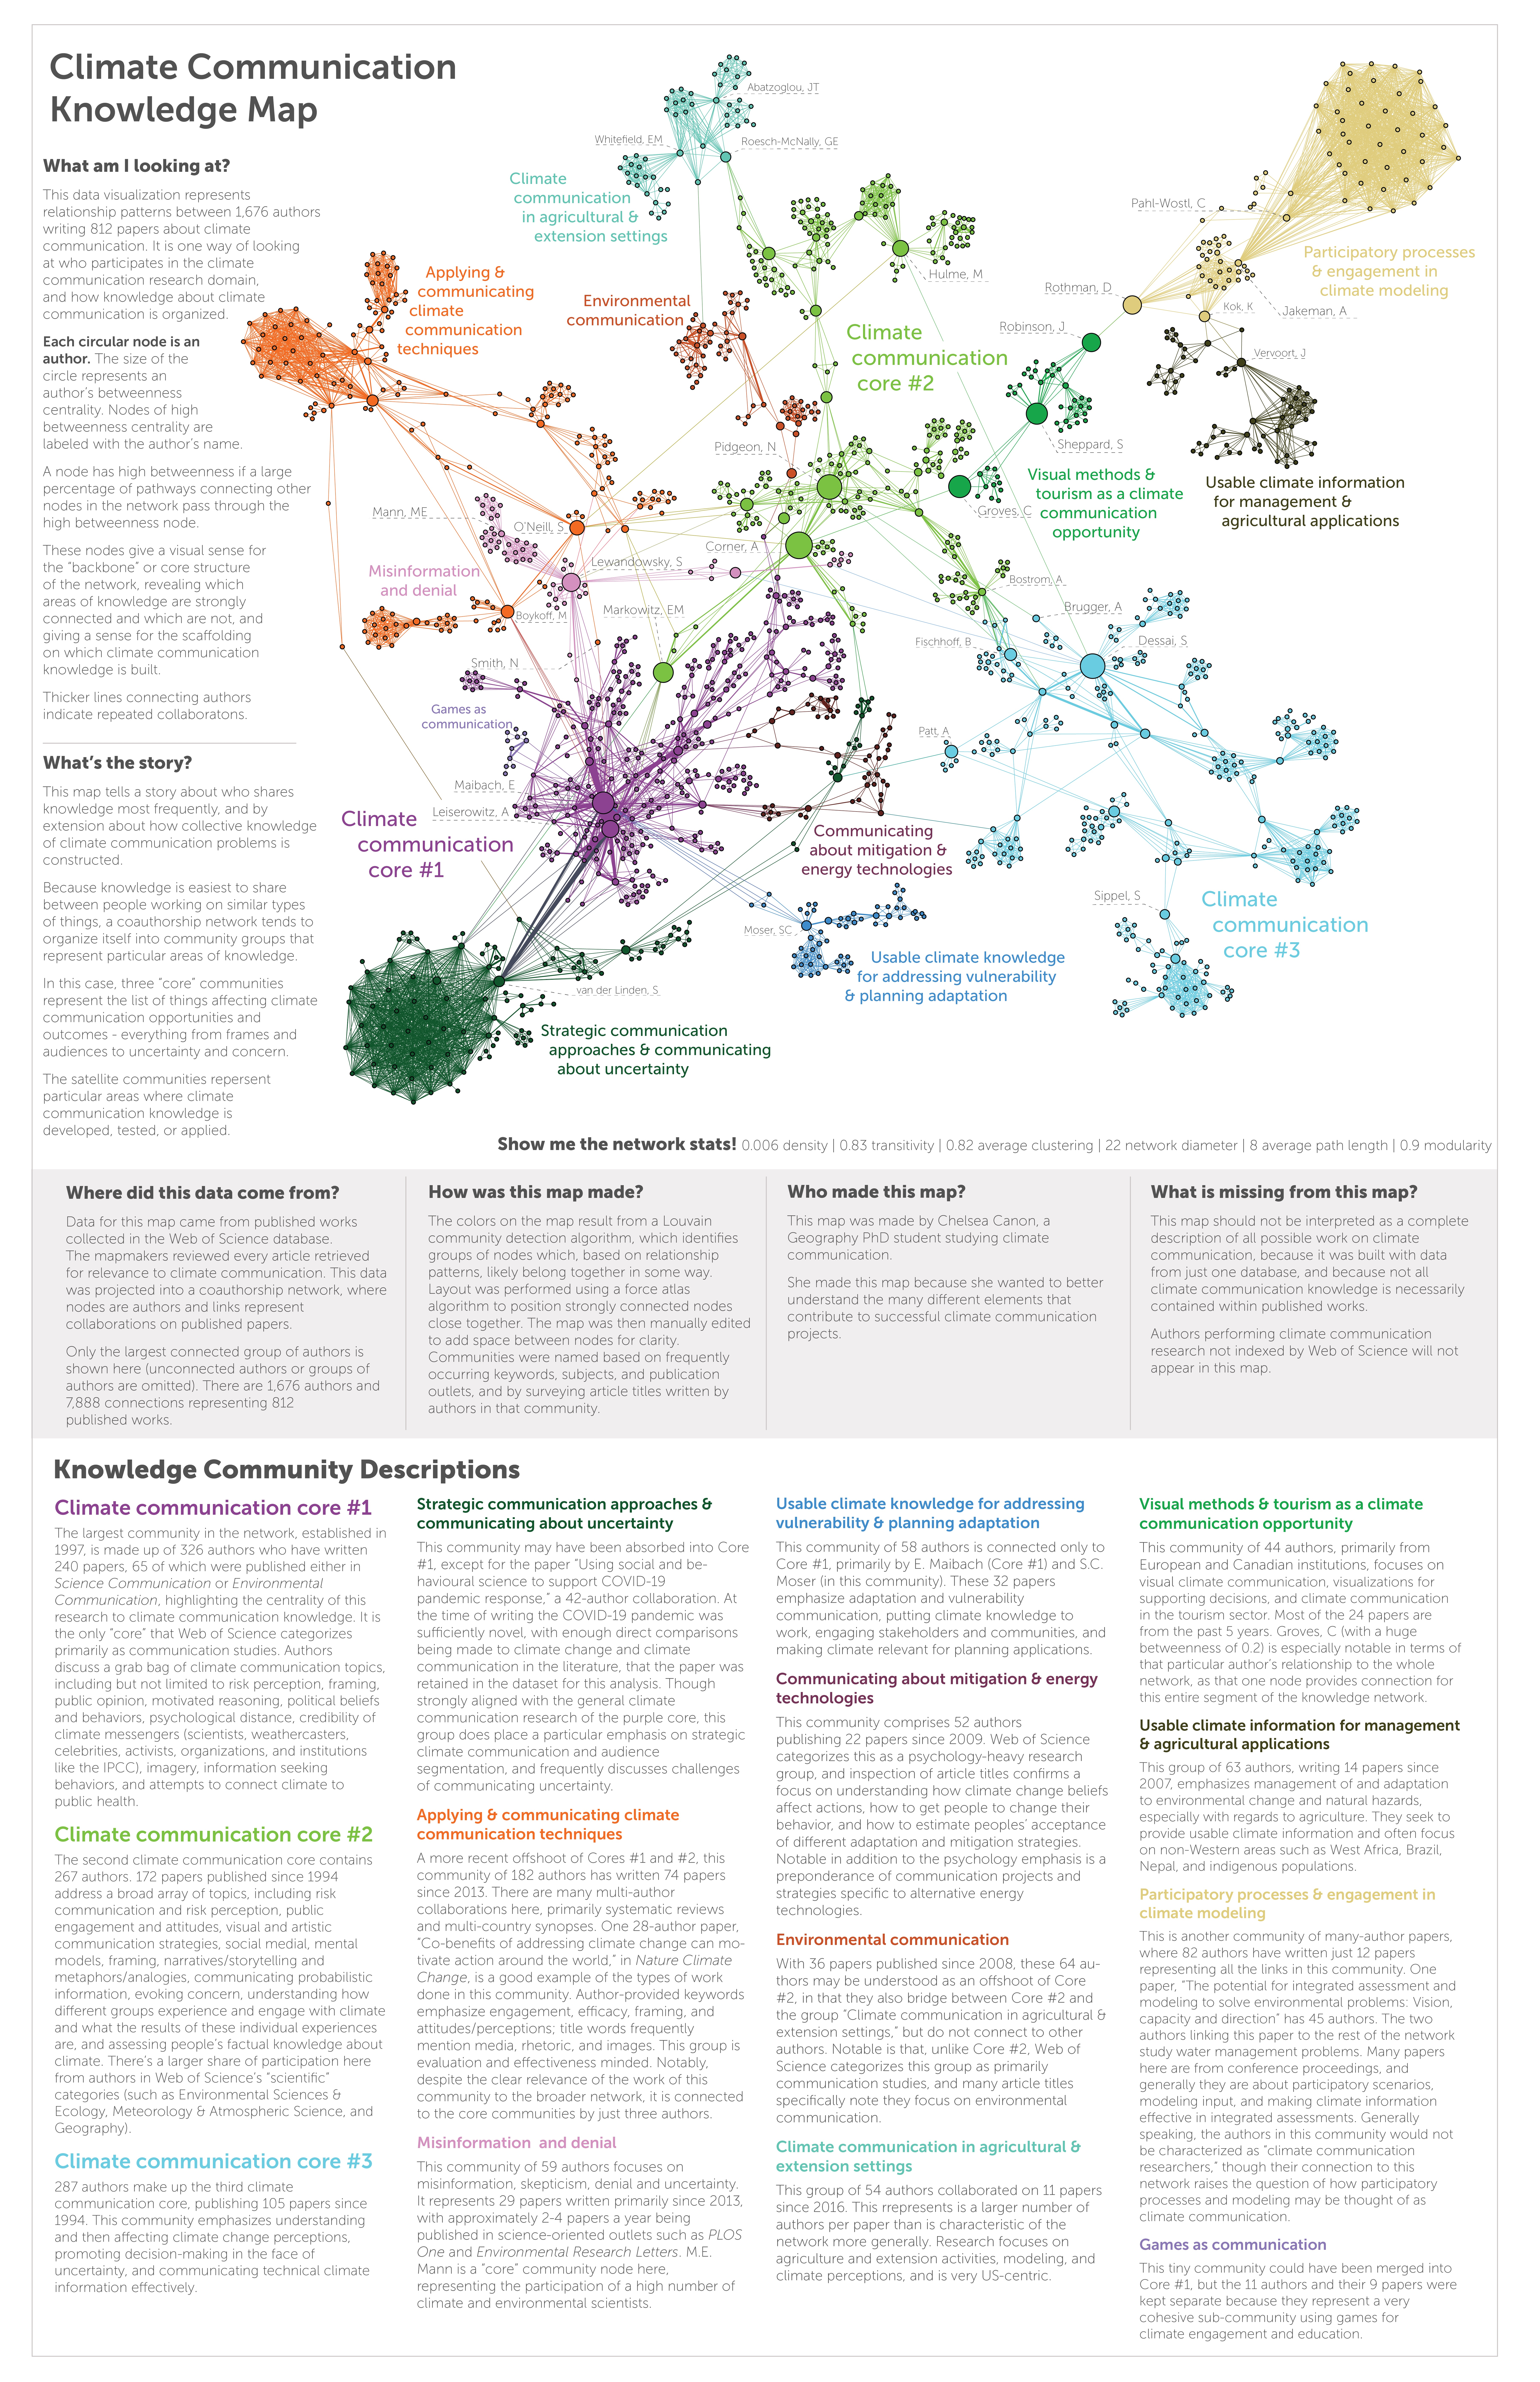 The climate communication knowledge map graphic with accompanying descriptions
              of the data as it is visually represented. There is a large, brightly colored network
              in the upper right of the document, and boxes of substantial text to the immediate
              left. At the bottom, the authors have color-coded headings which correspond to the
              network graphic.